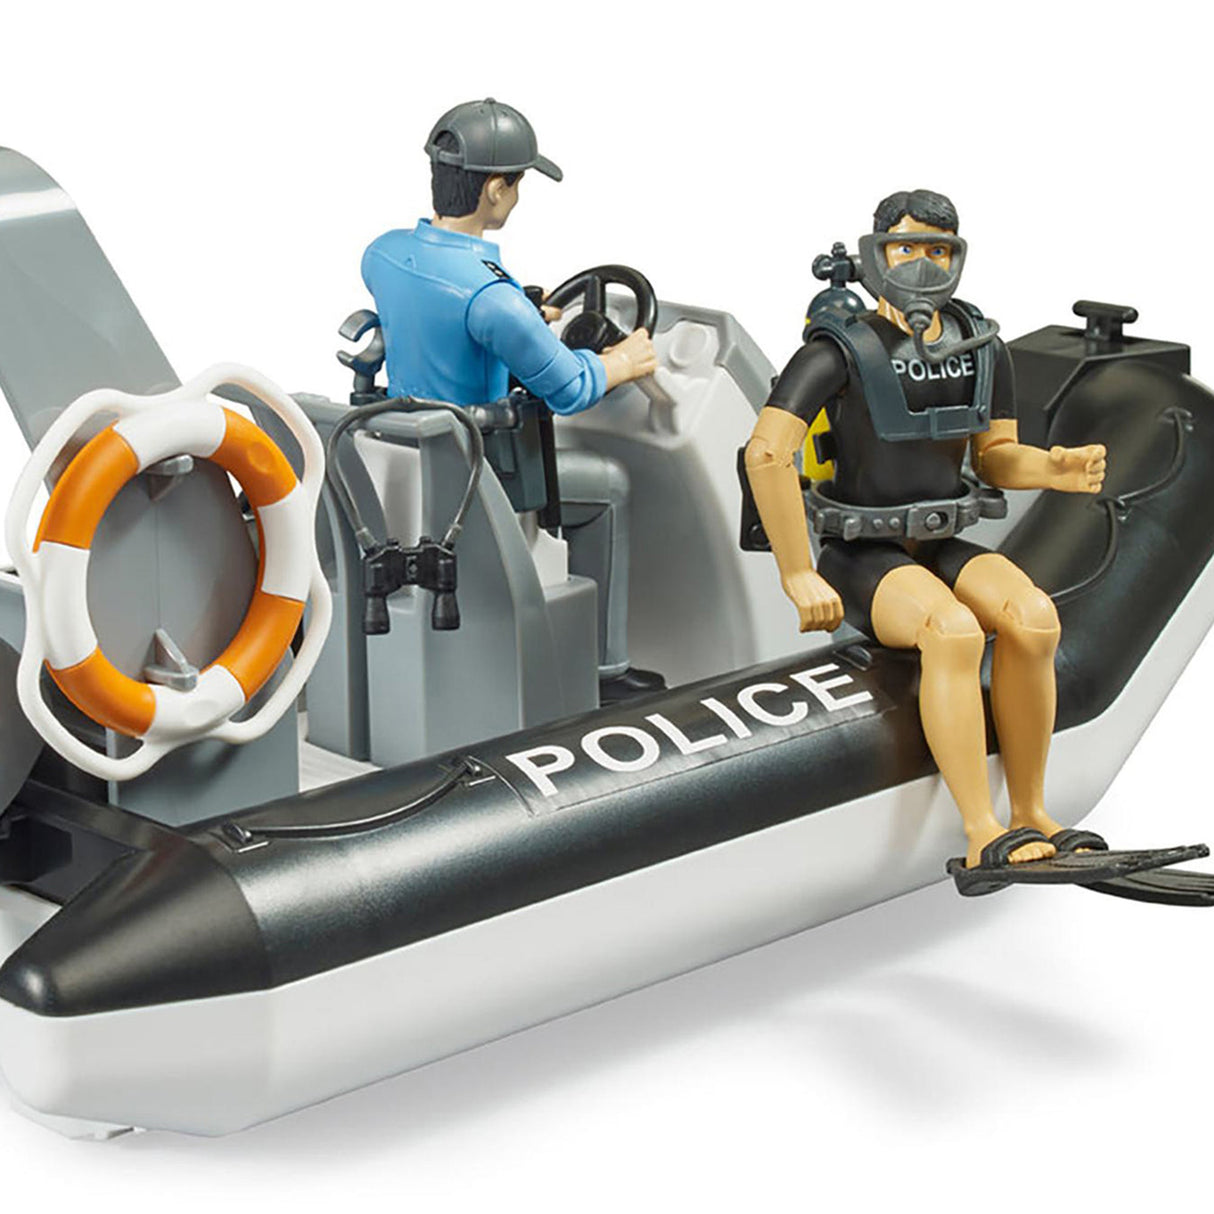 Bruder 1:16 Bworld Police Boat with Figures, Beacon & Accessories